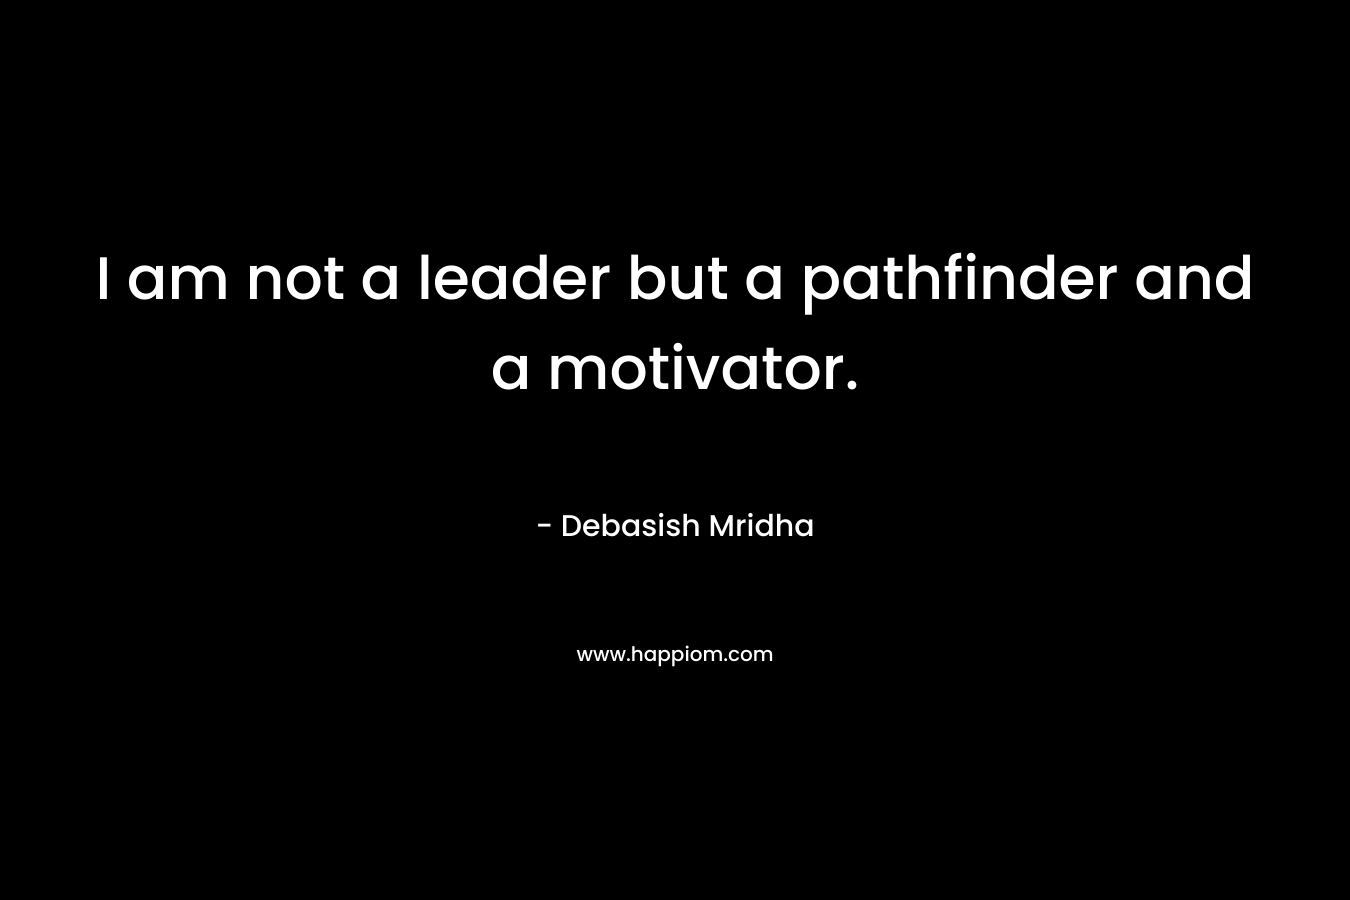 I am not a leader but a pathfinder and a motivator.